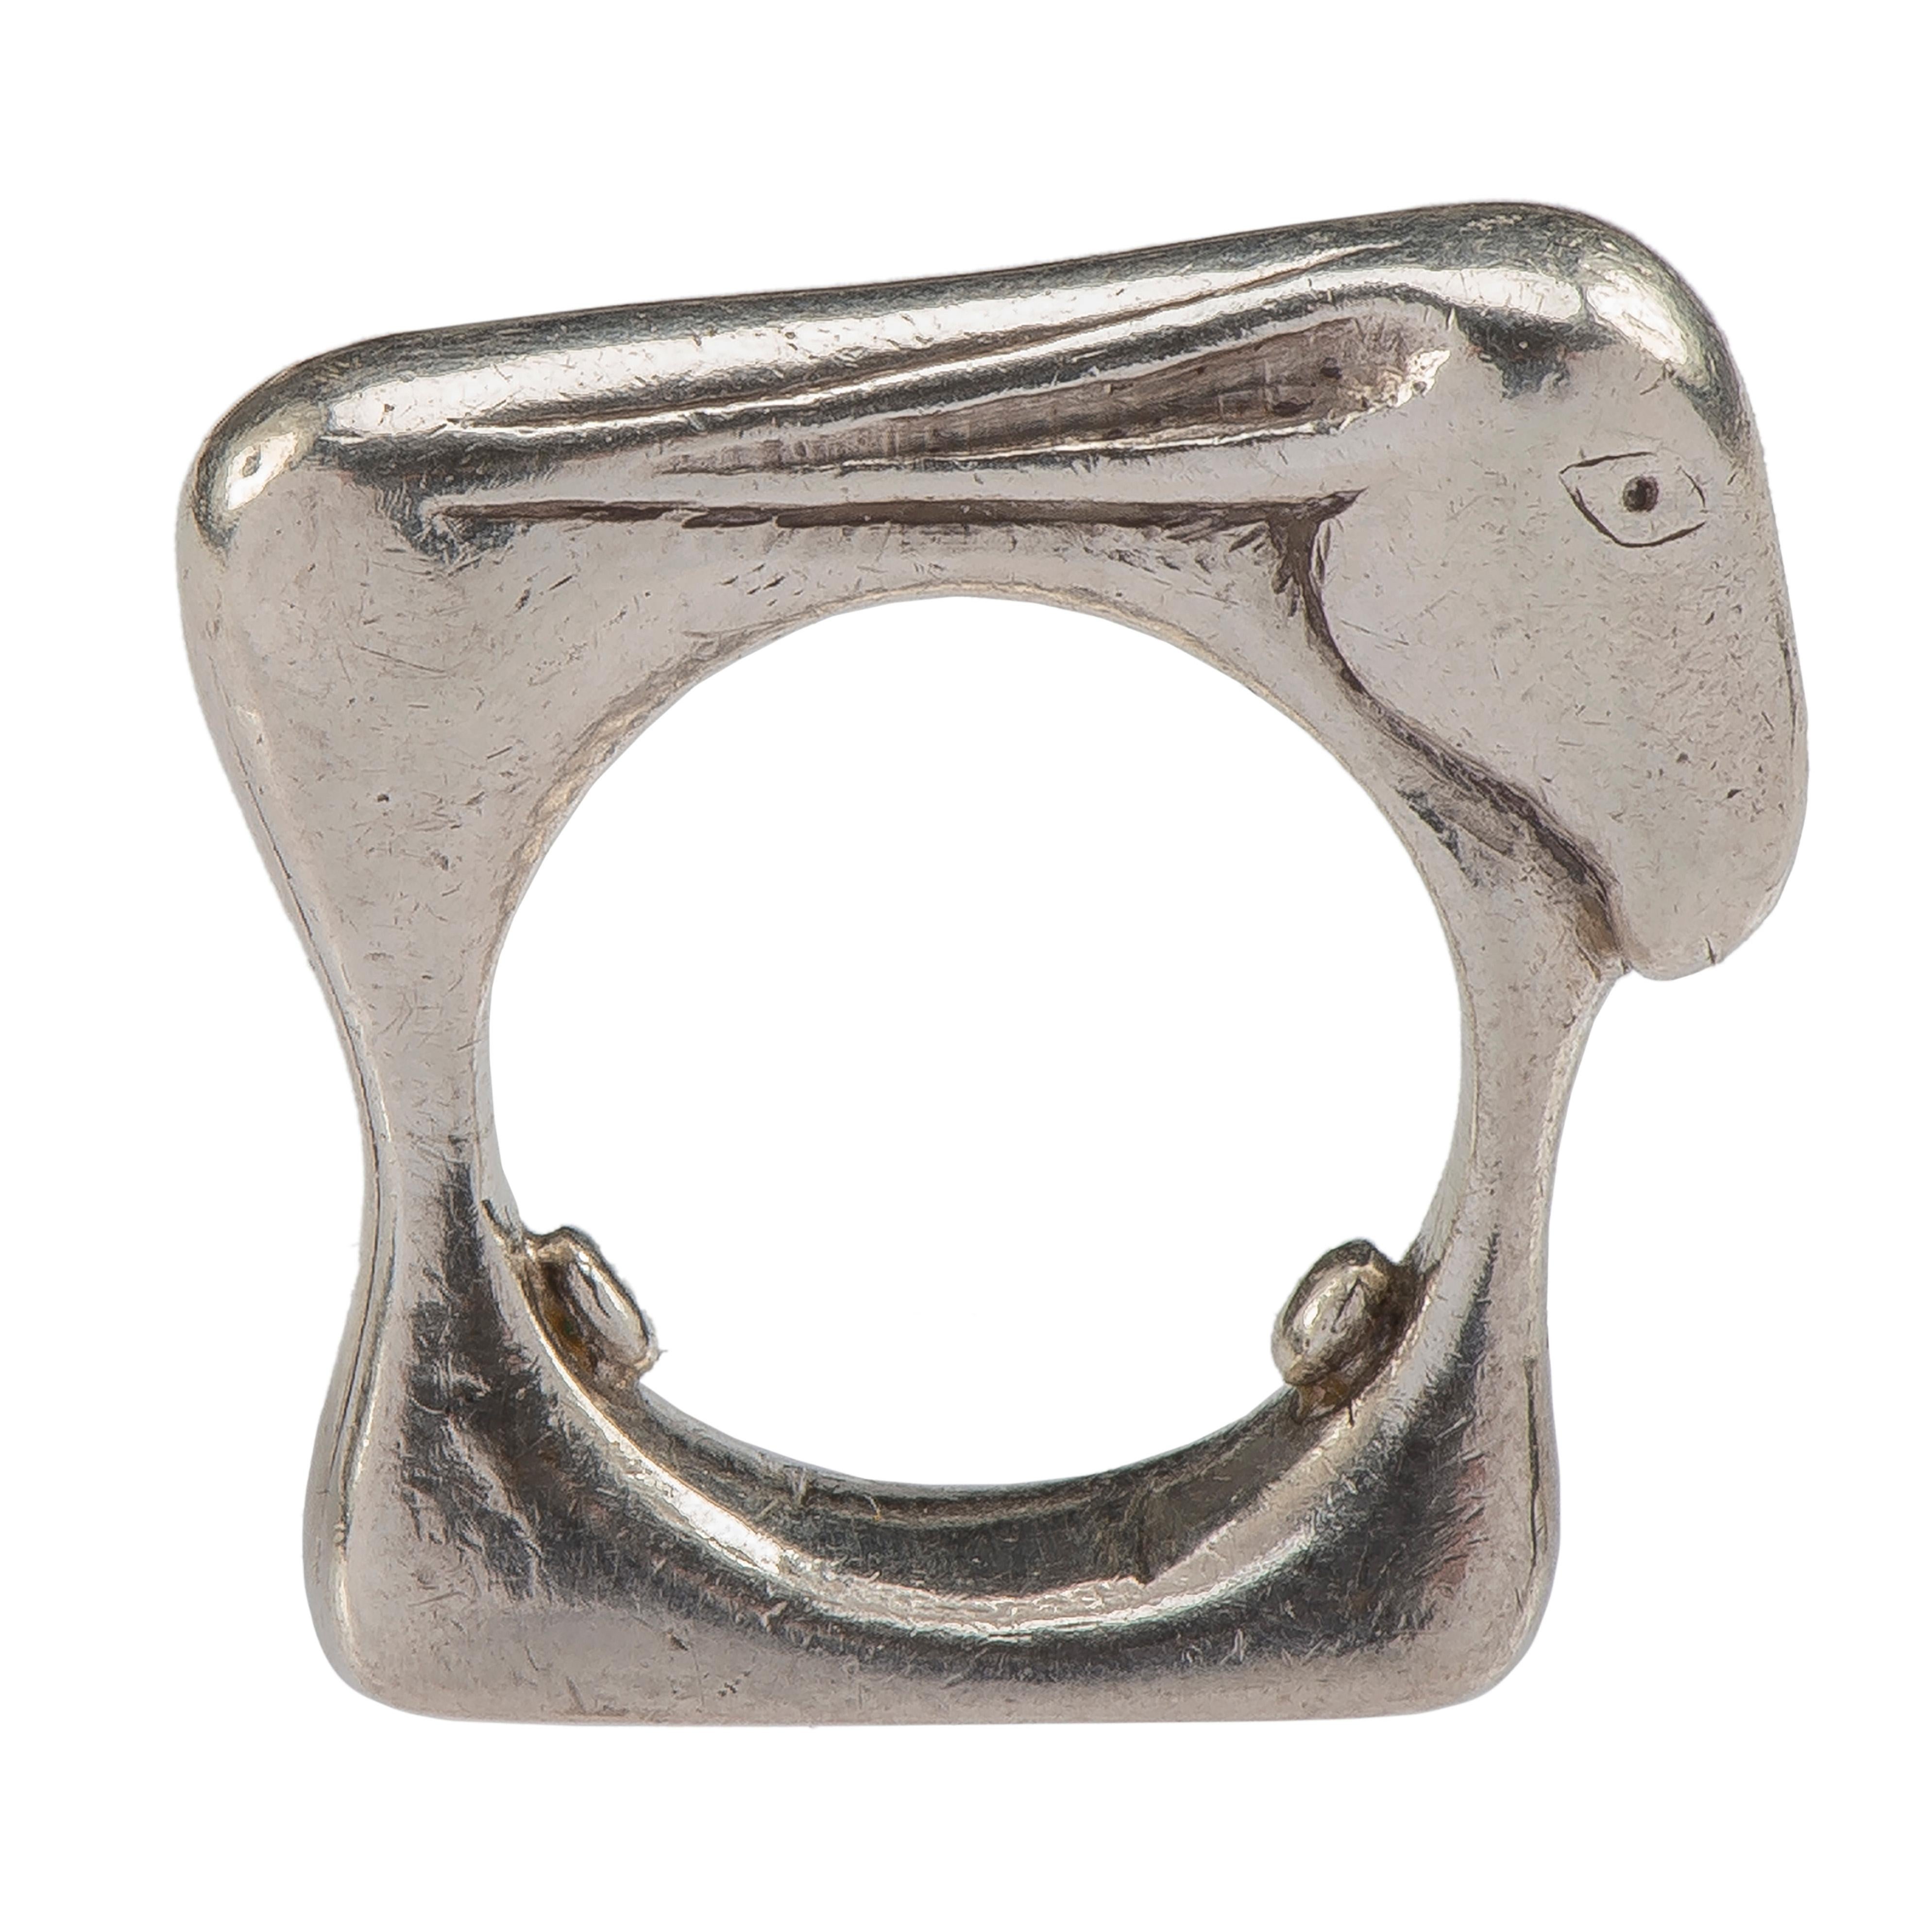 Mosheh Oved Donkey ring
England, c. 1940
Silver
Weight 21.6 gr; Circumference 49.32 mm; US size 5 ; UK size J 1/2 ; At widest point 28.5 mm long

The heavy silver ring is modelled as a donkey in profile view standing on a base with a round opening